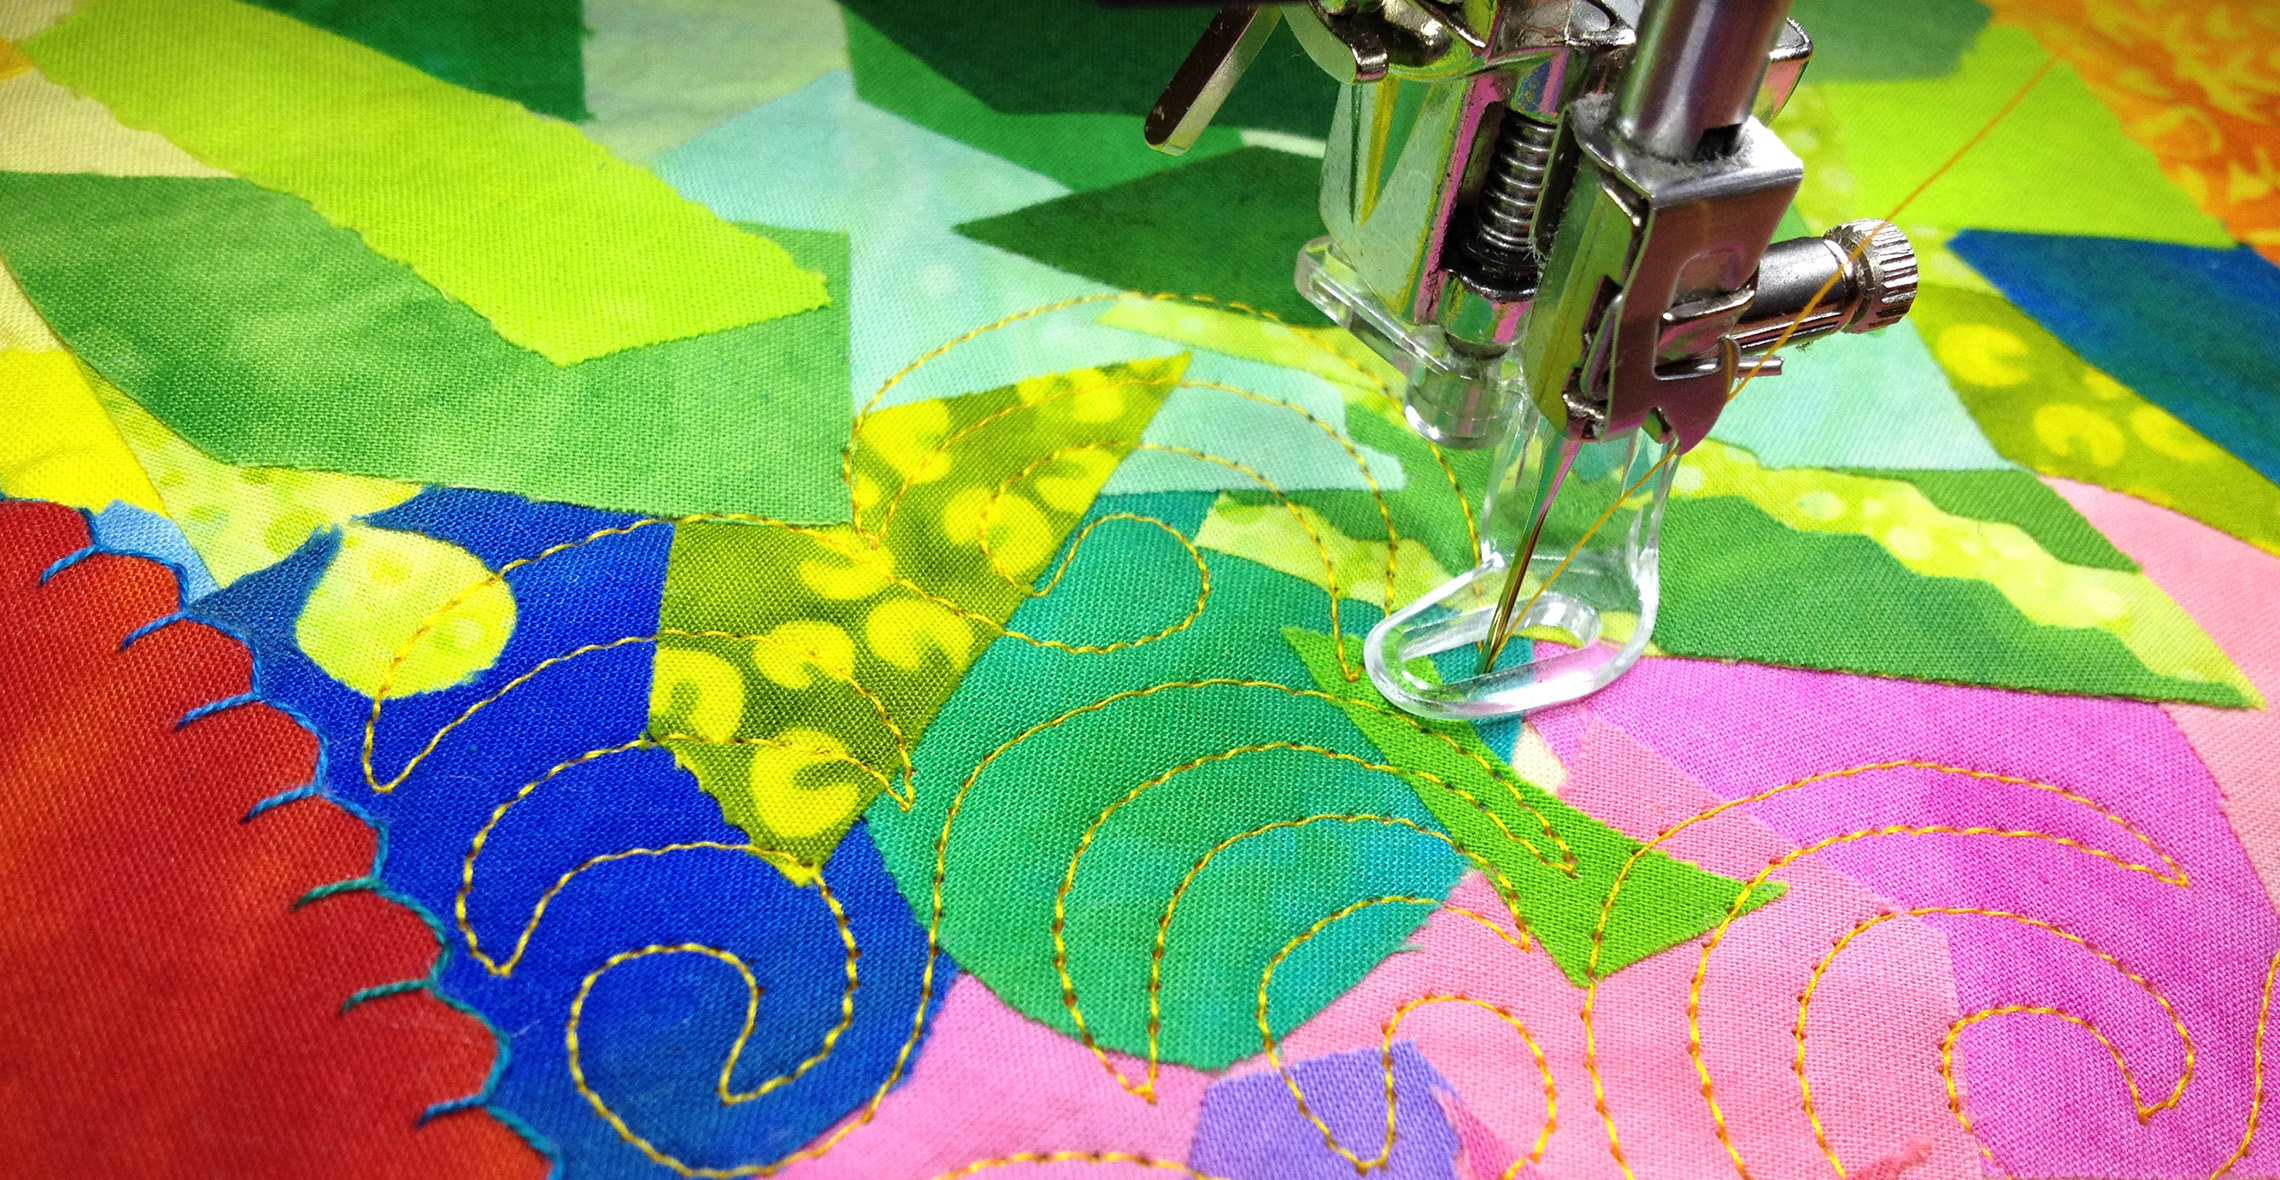 Quilting UFOs with the BERNINA Q 16 - WeAllSew